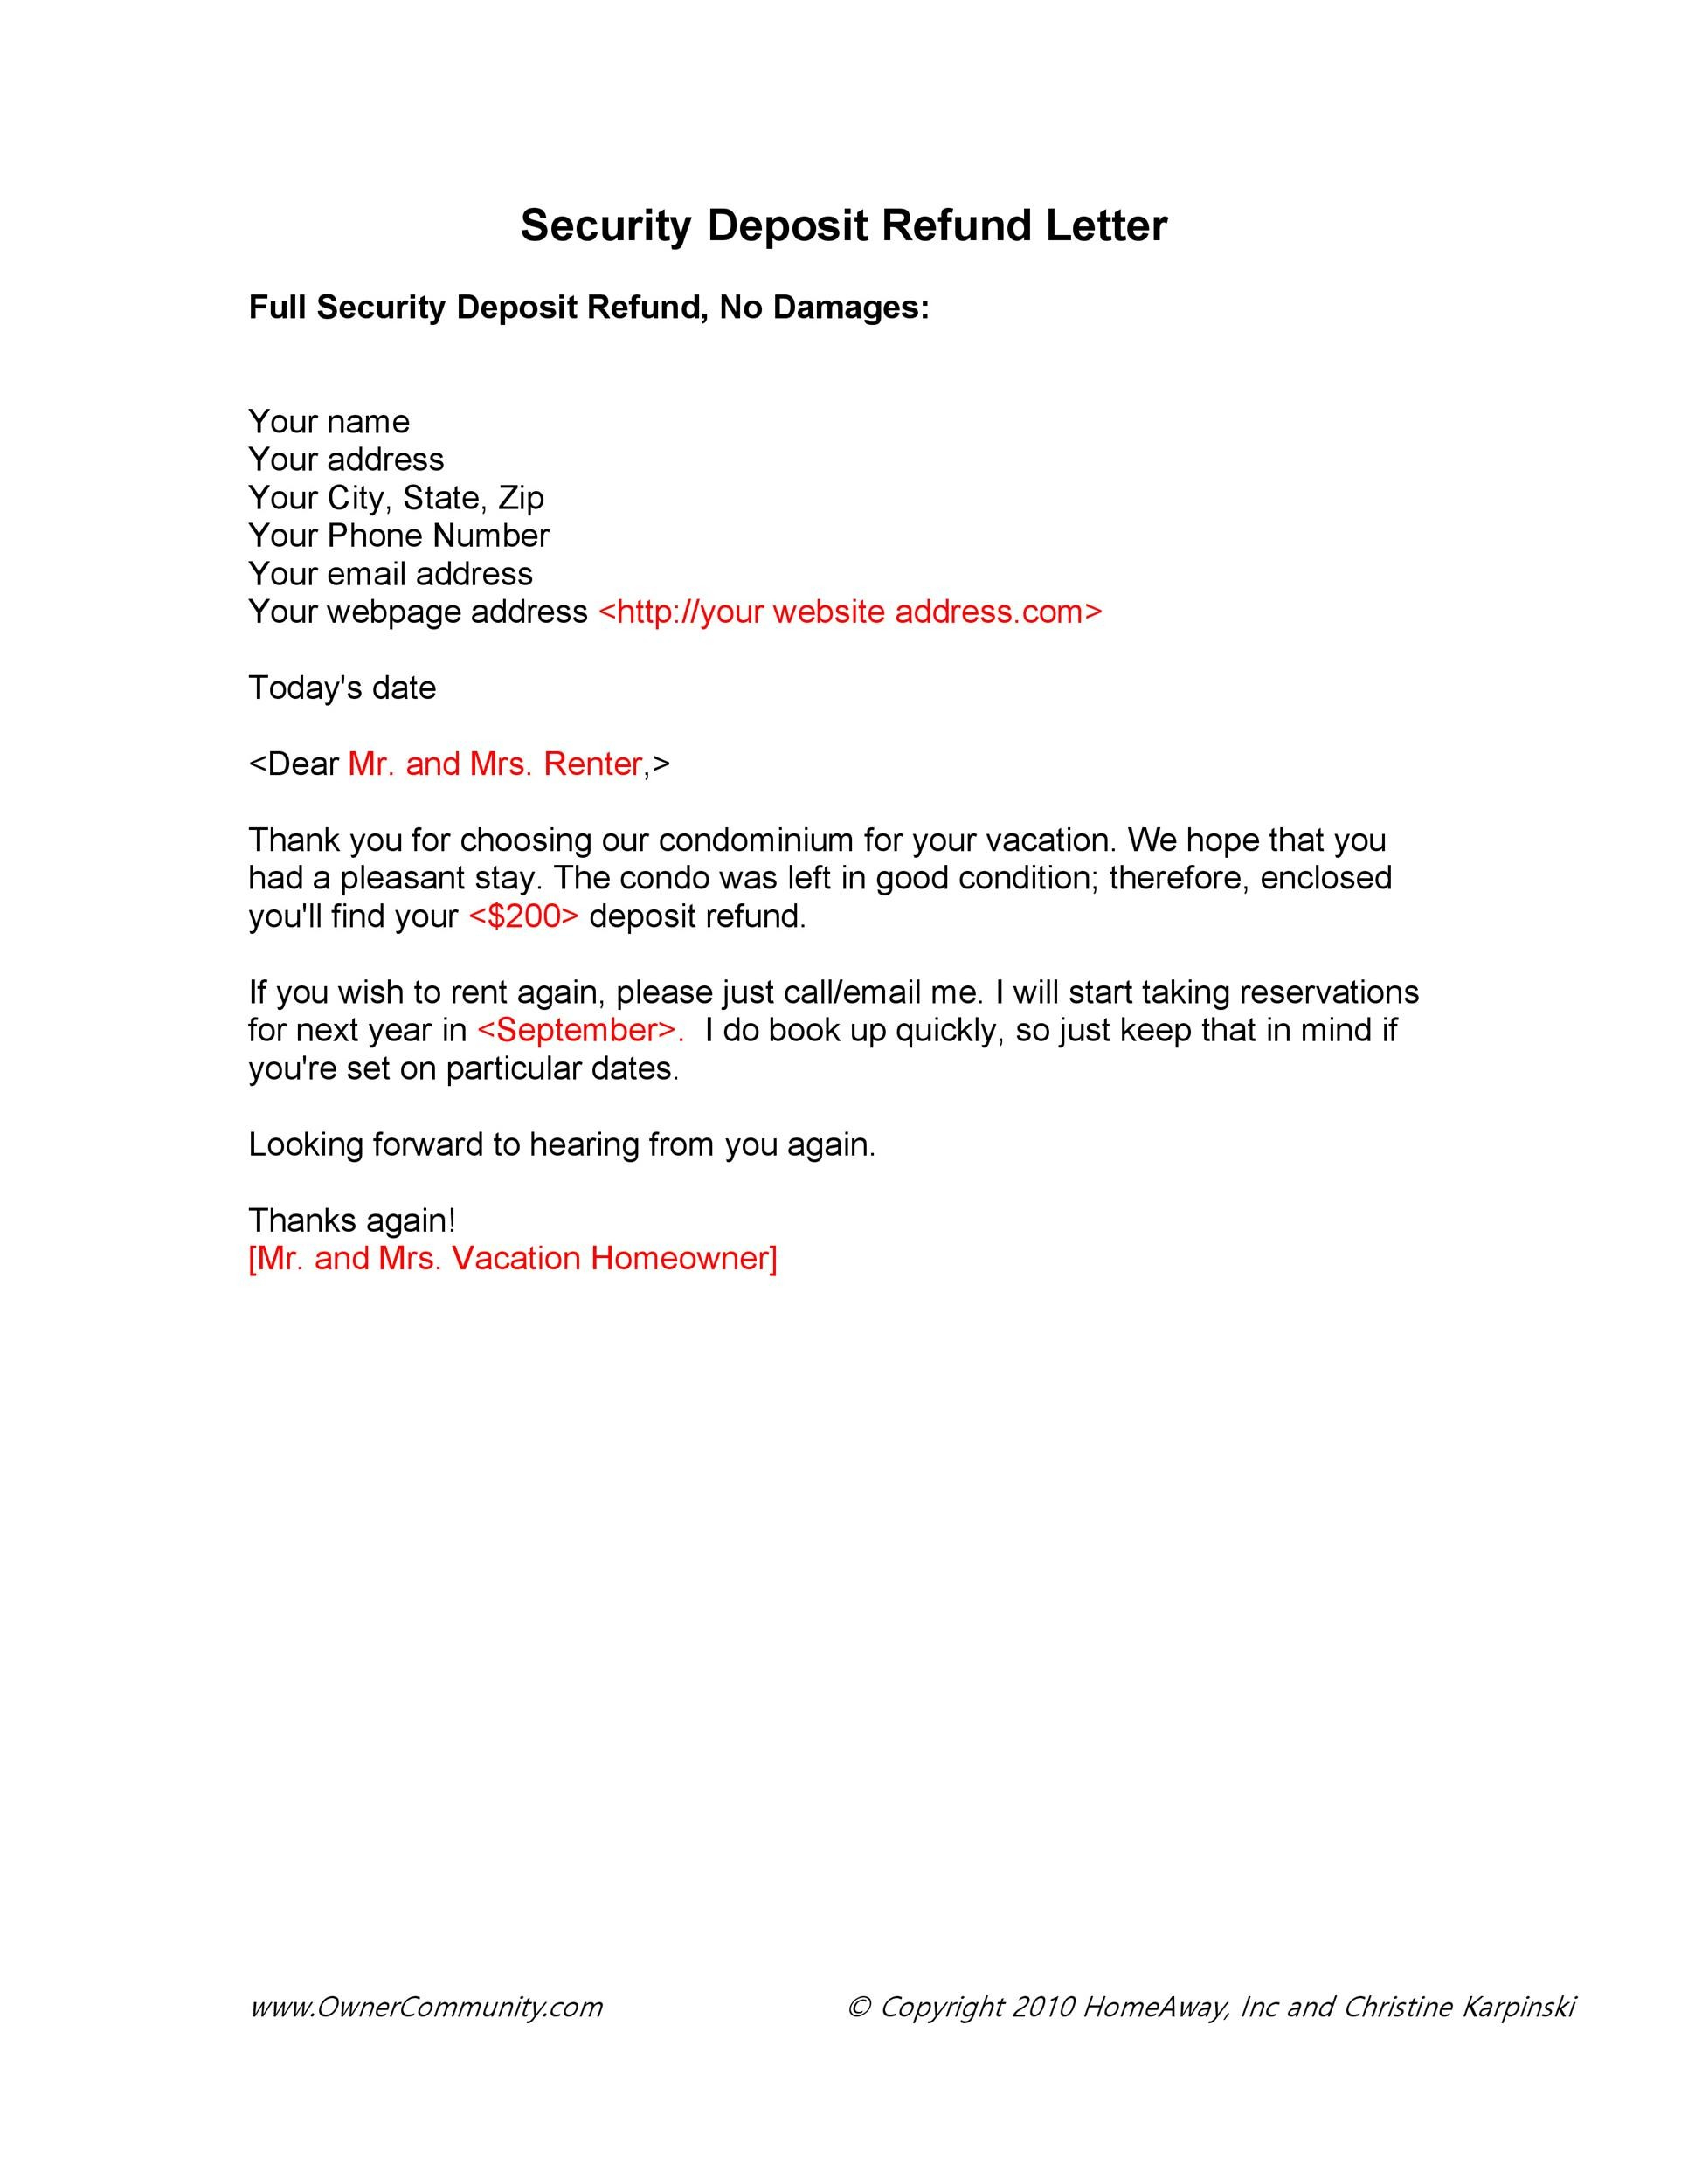 10 Effective Security Deposit Return Letters [MS Word] ᐅ TemplateLab For Not Returning Security Deposit Letter For Not Returning Security Deposit Letter